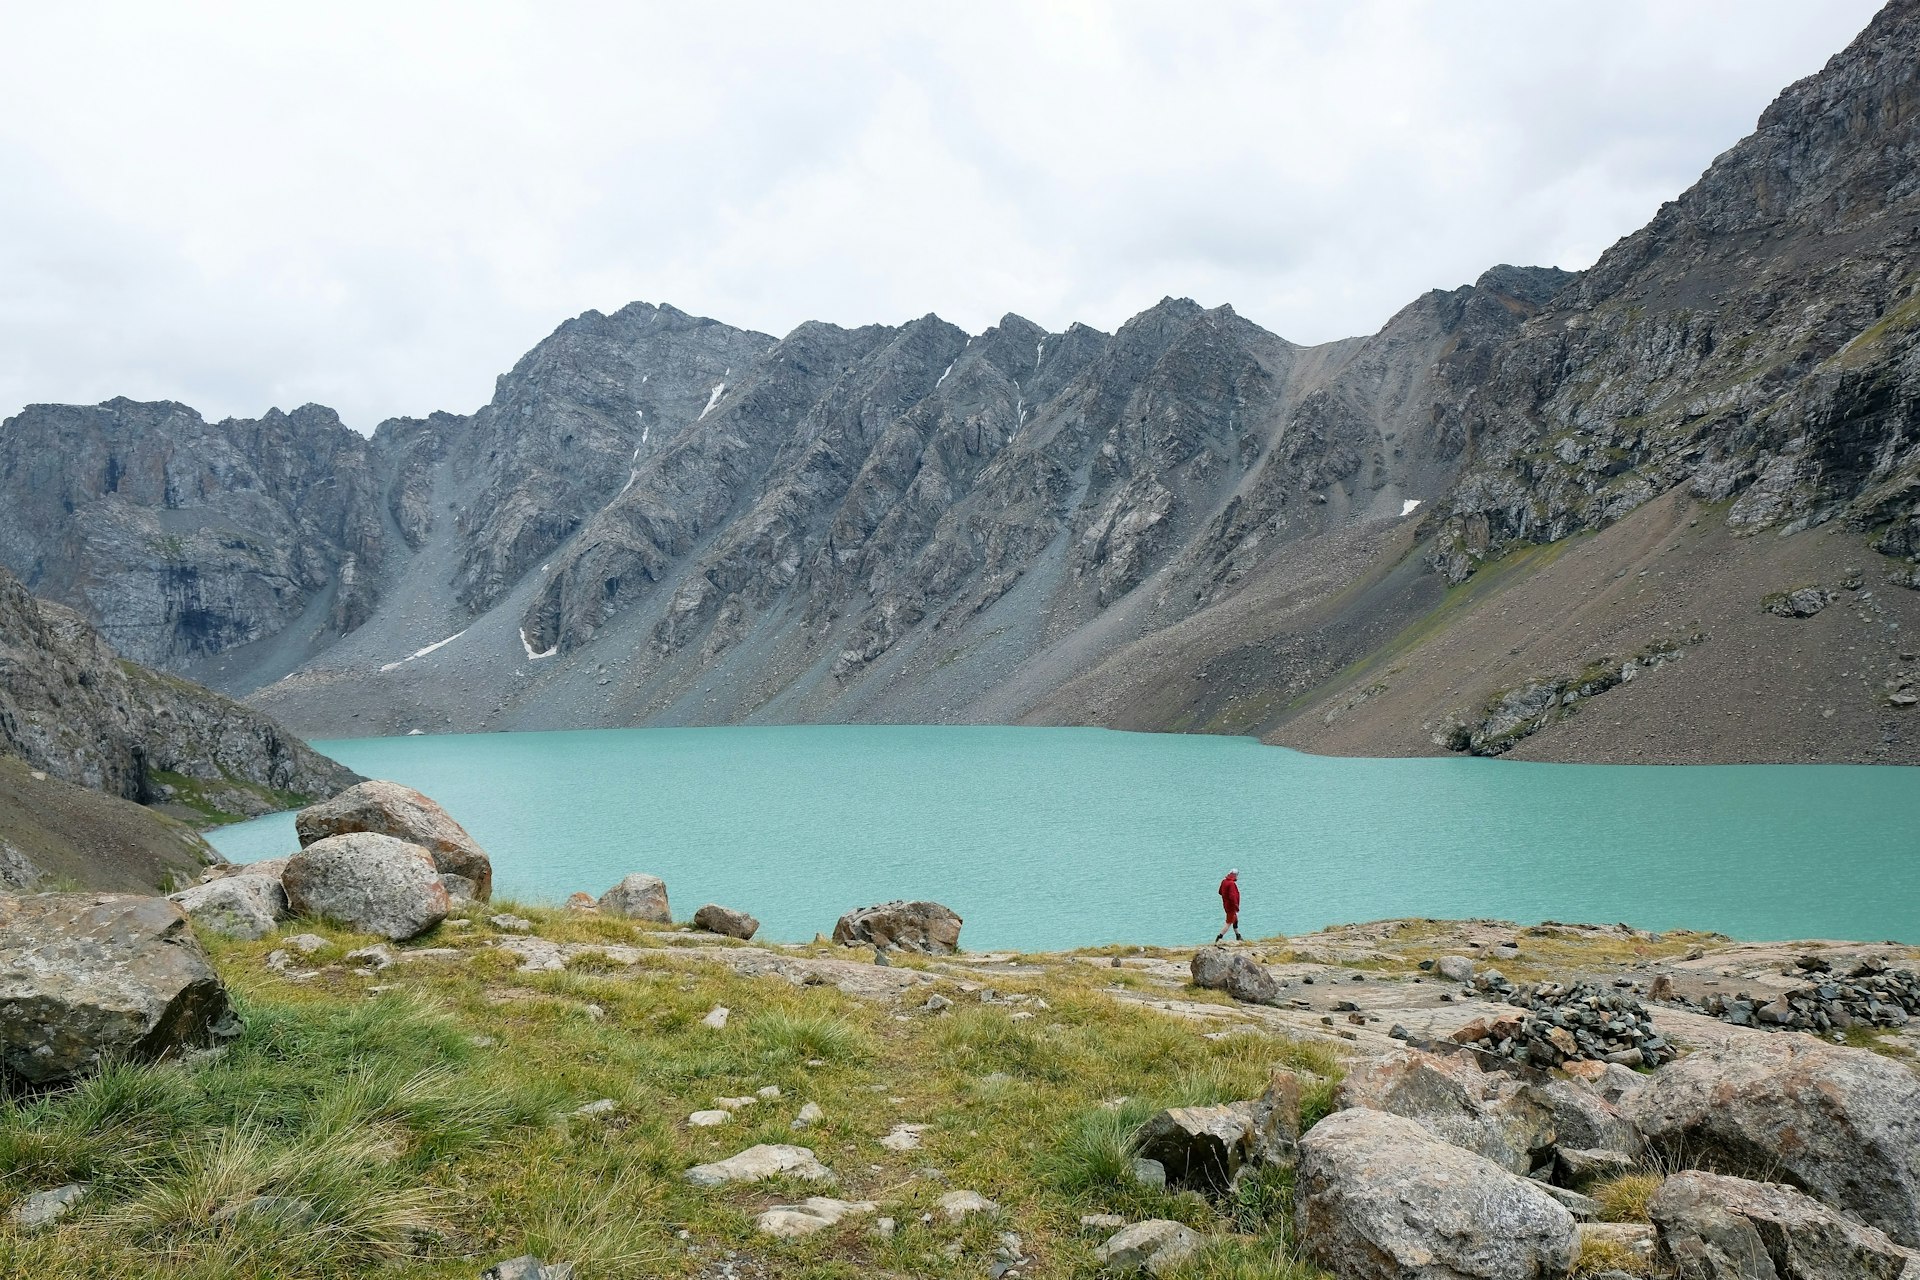 A sole hiker walking near the edge of a turquoise alpine lake